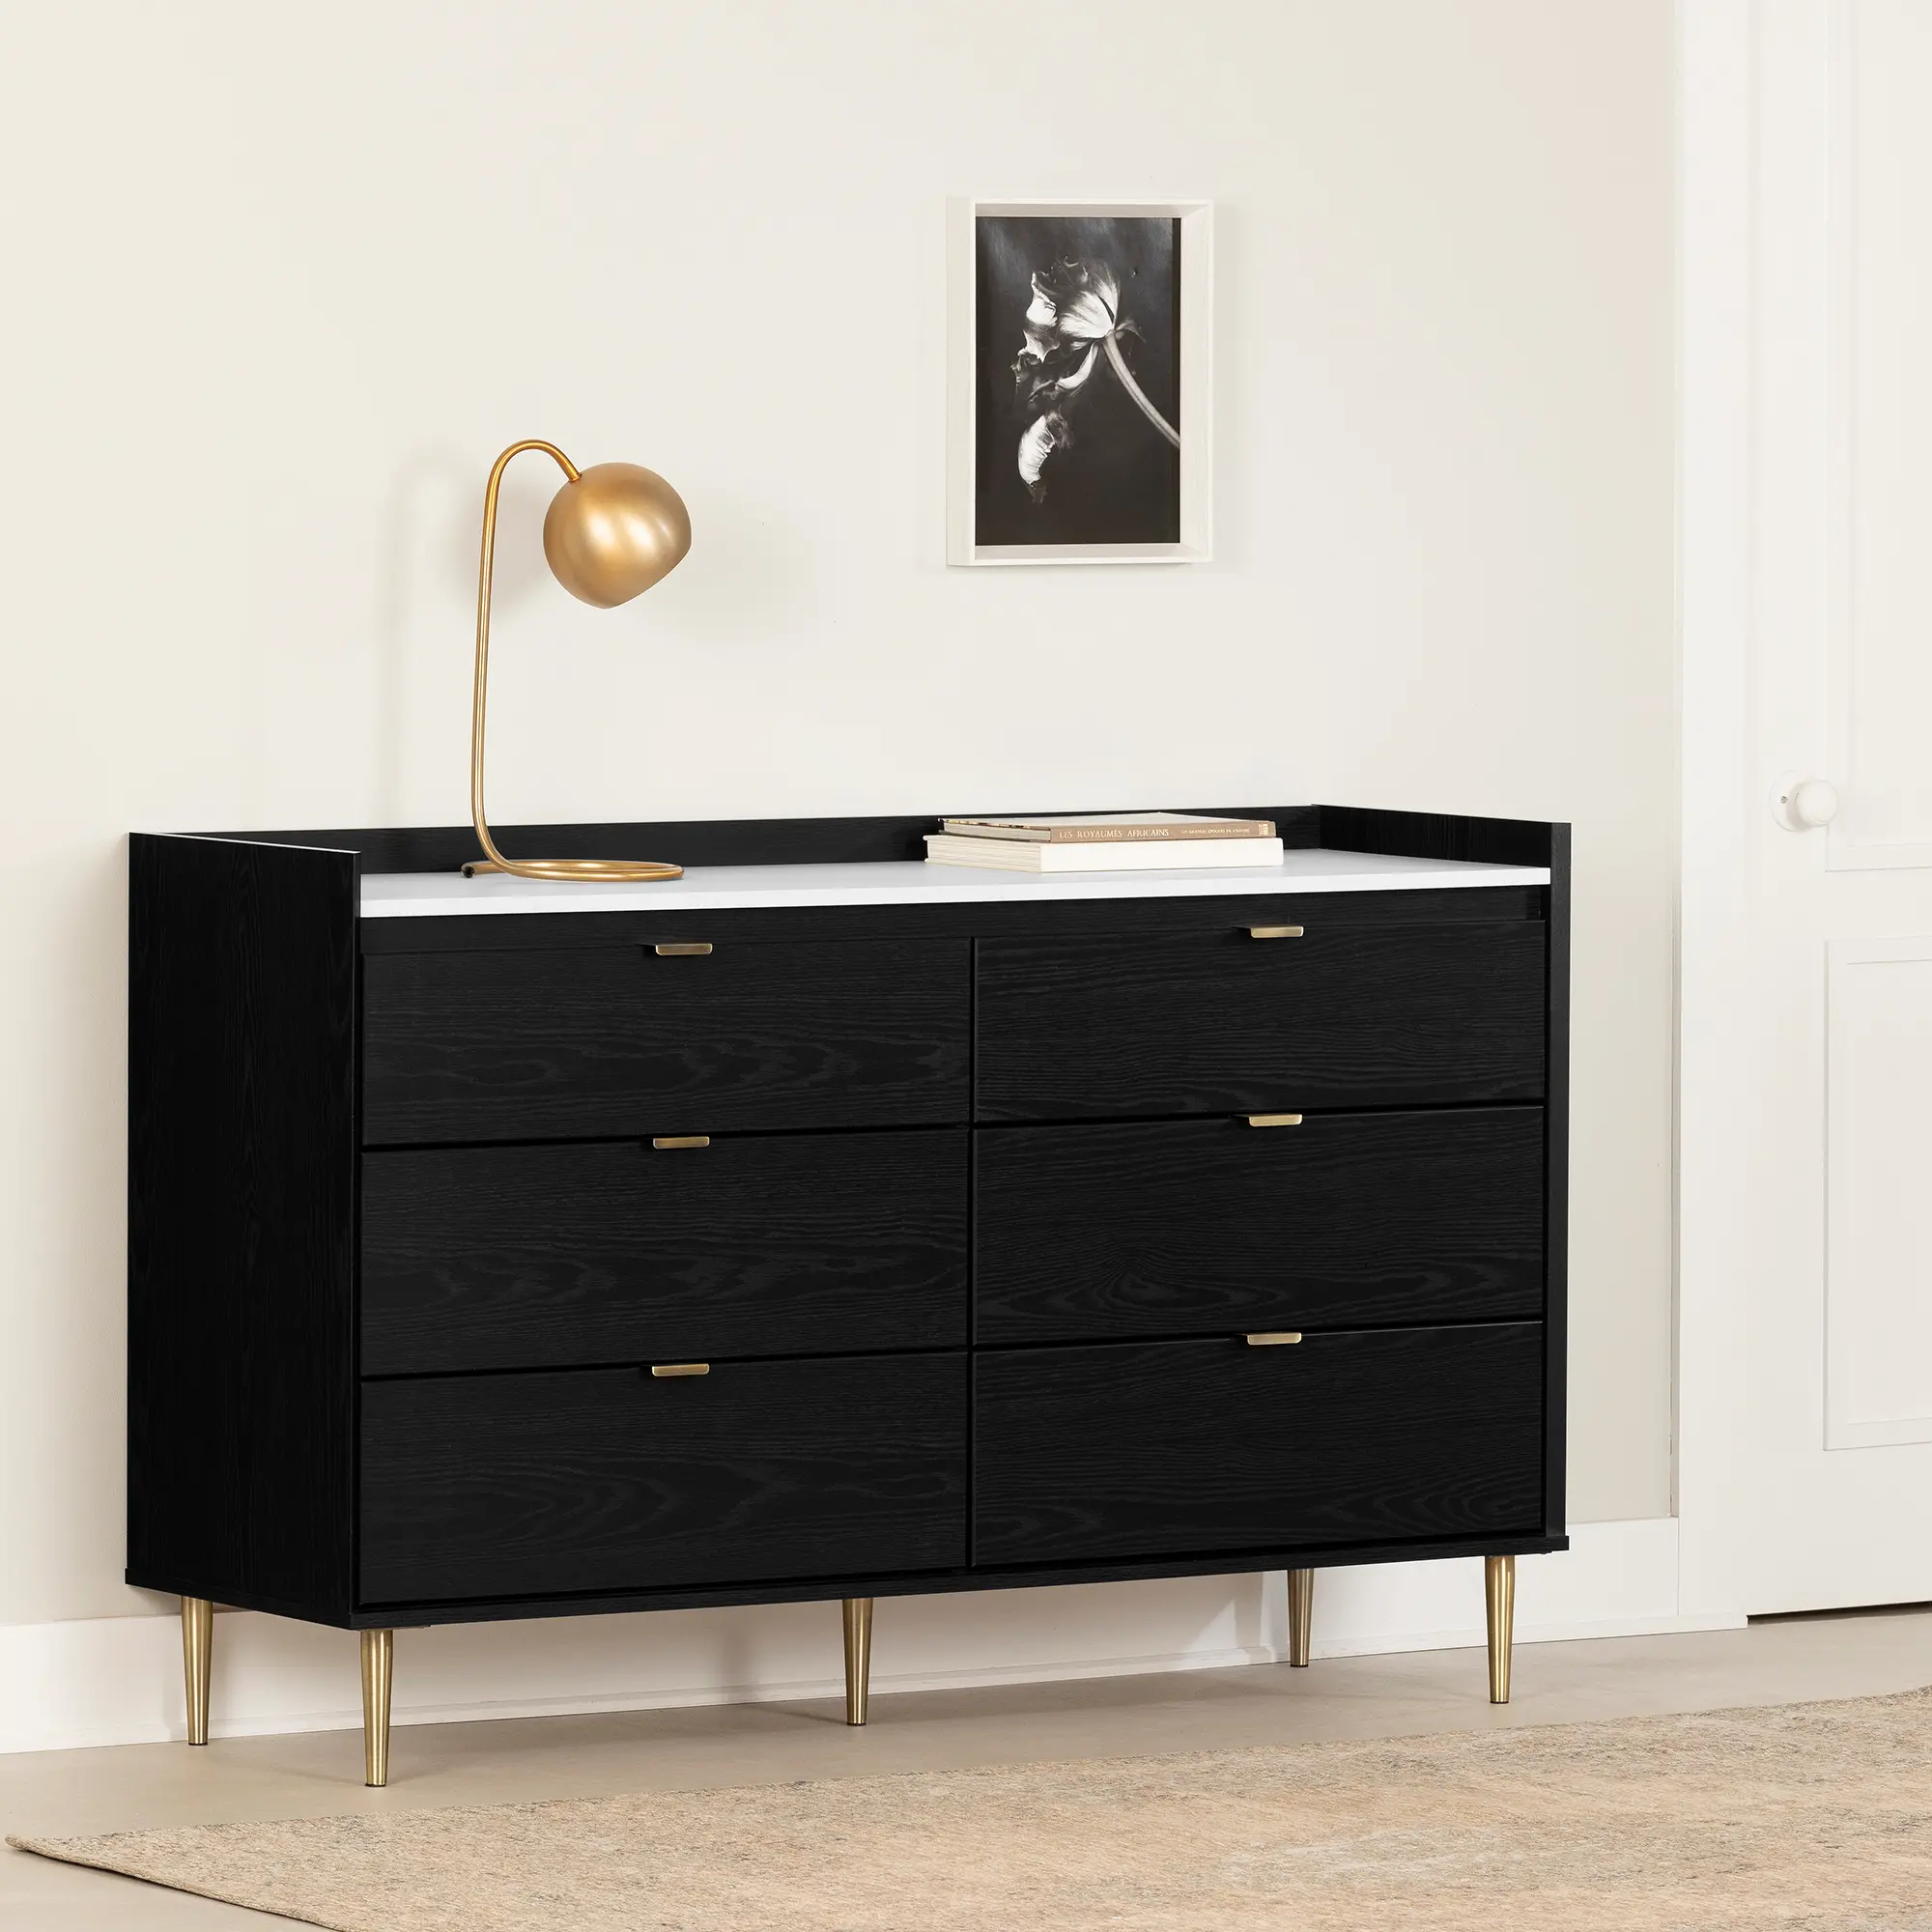 Hype Black and Carrara Marble 6-Drawer Double Dresser - South Shore